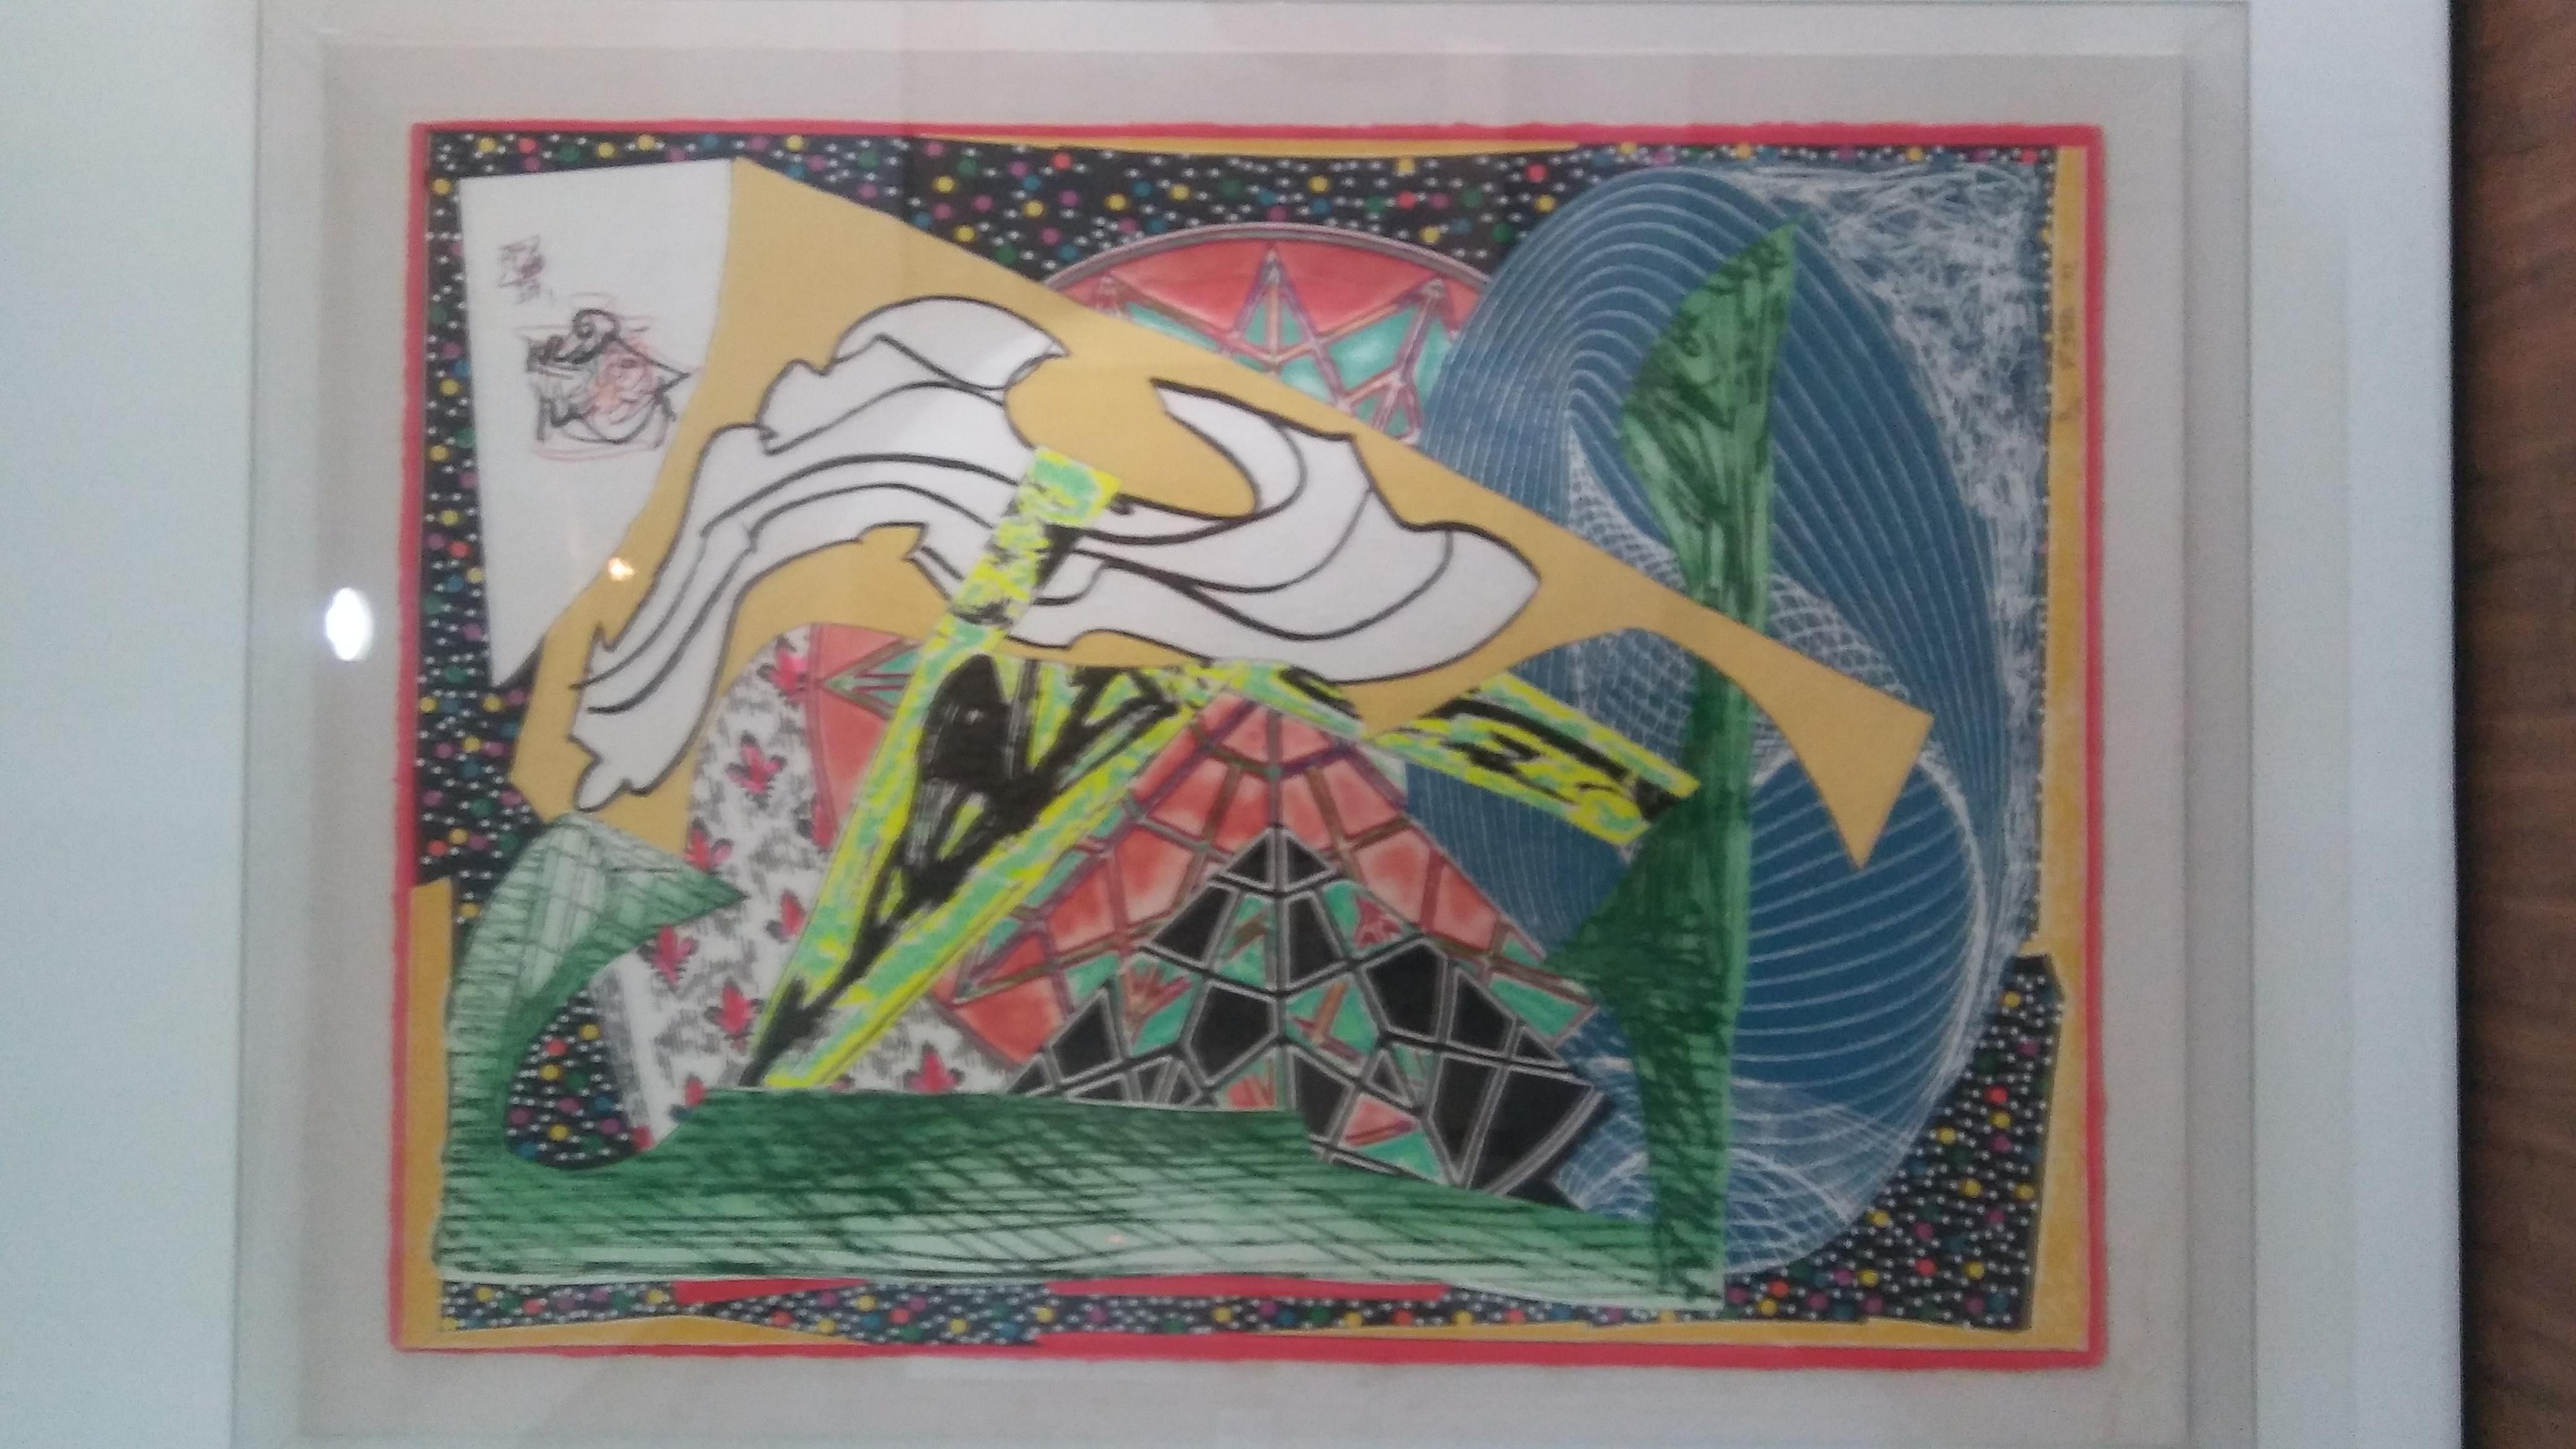 Moby Dick - Print by Frank Stella